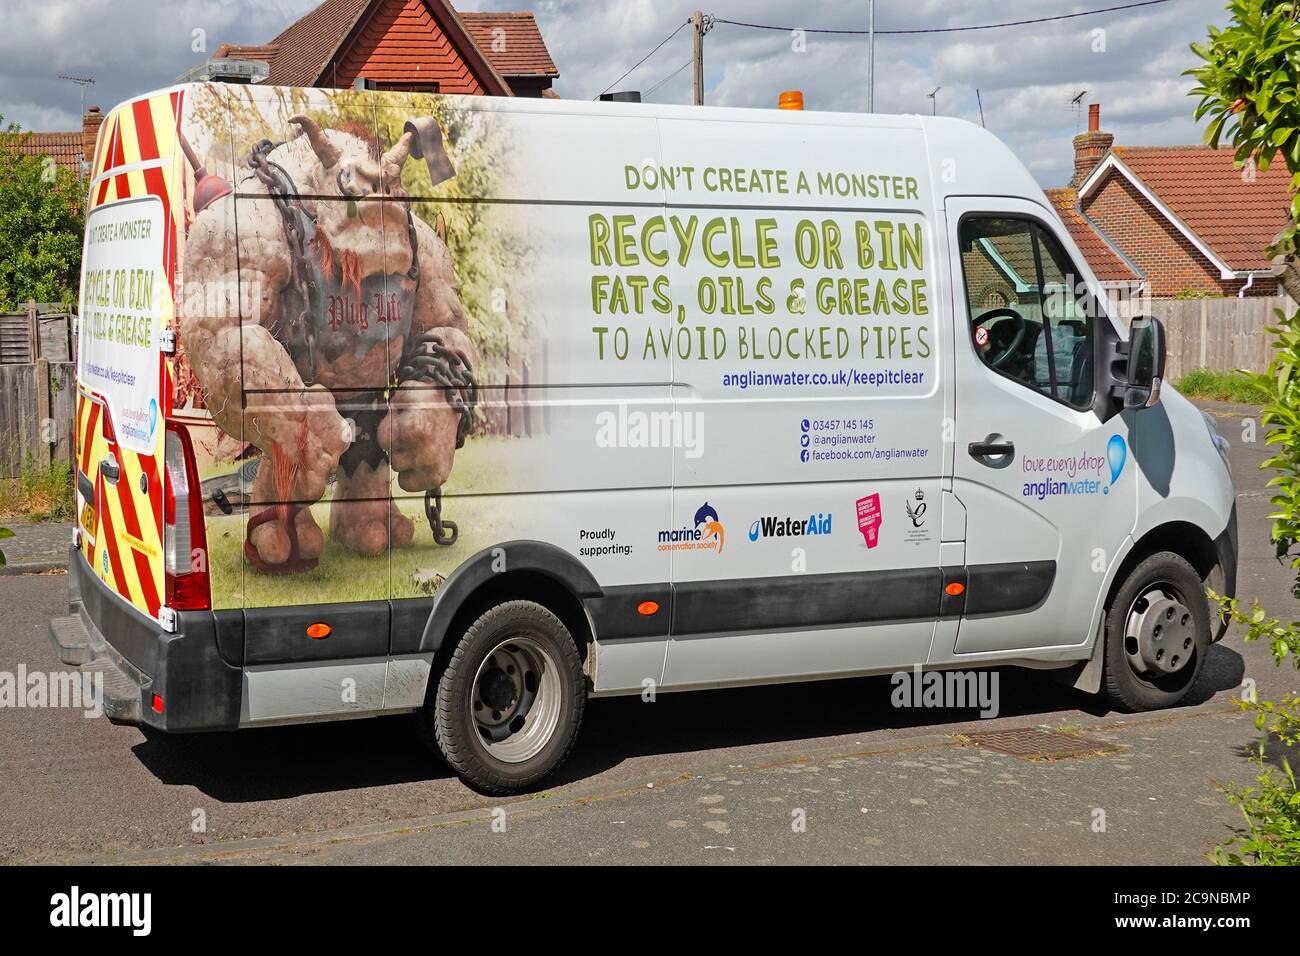 Anglian Water van providing blocked drain sewer clearing service & educational advertising promoting recycle fats oils grease preventing blockages UK Stock Photo